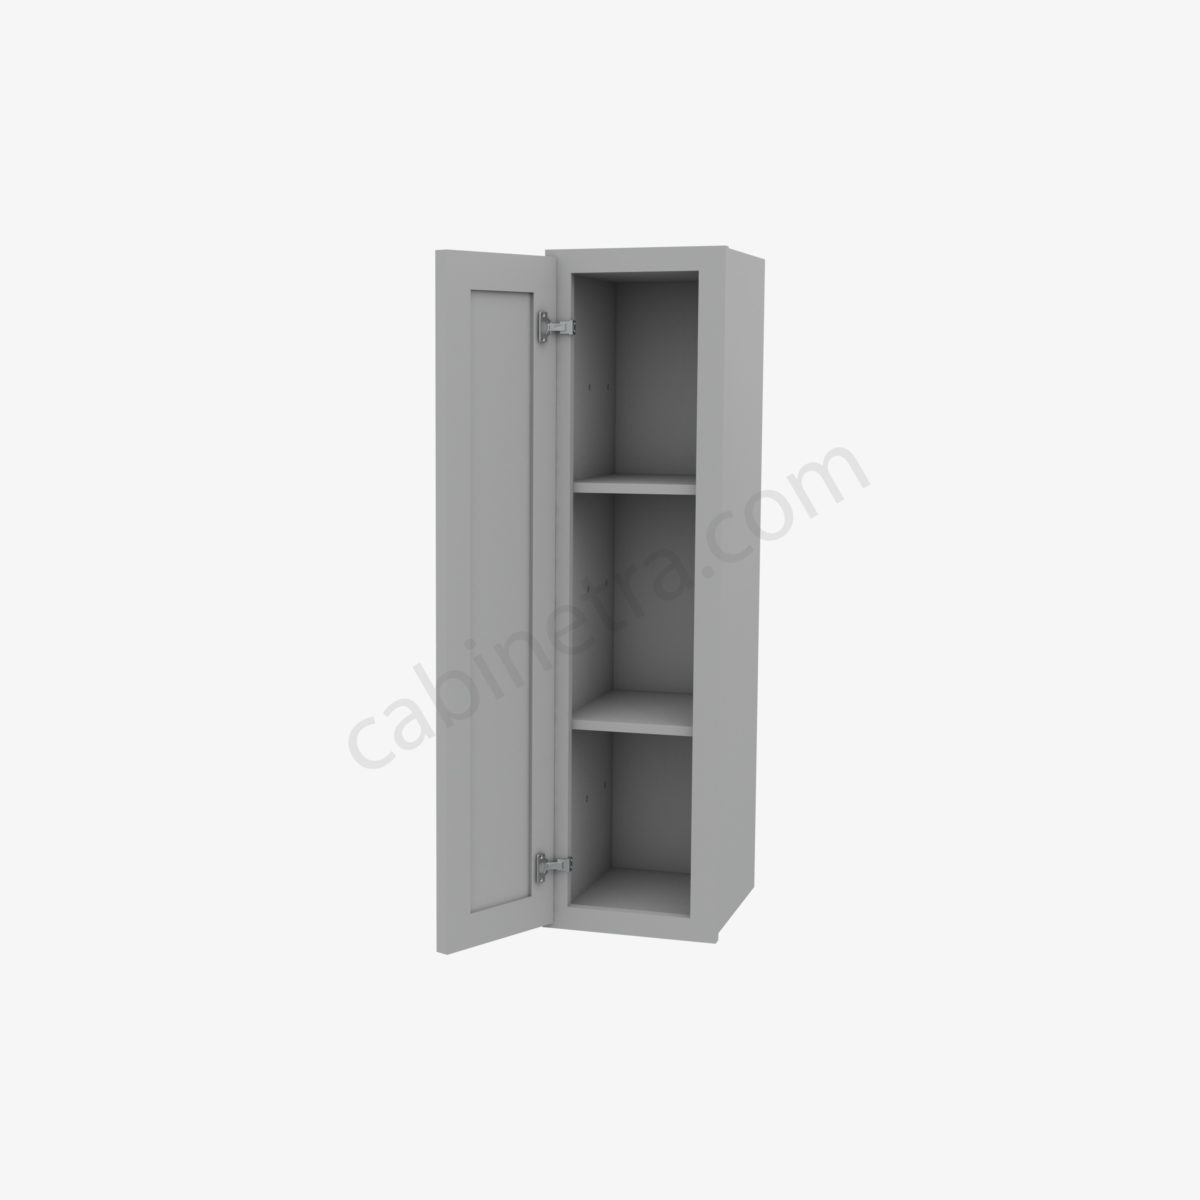 AB W0936 5 Forevermark Lait Gray Shaker Cabinetra scaled